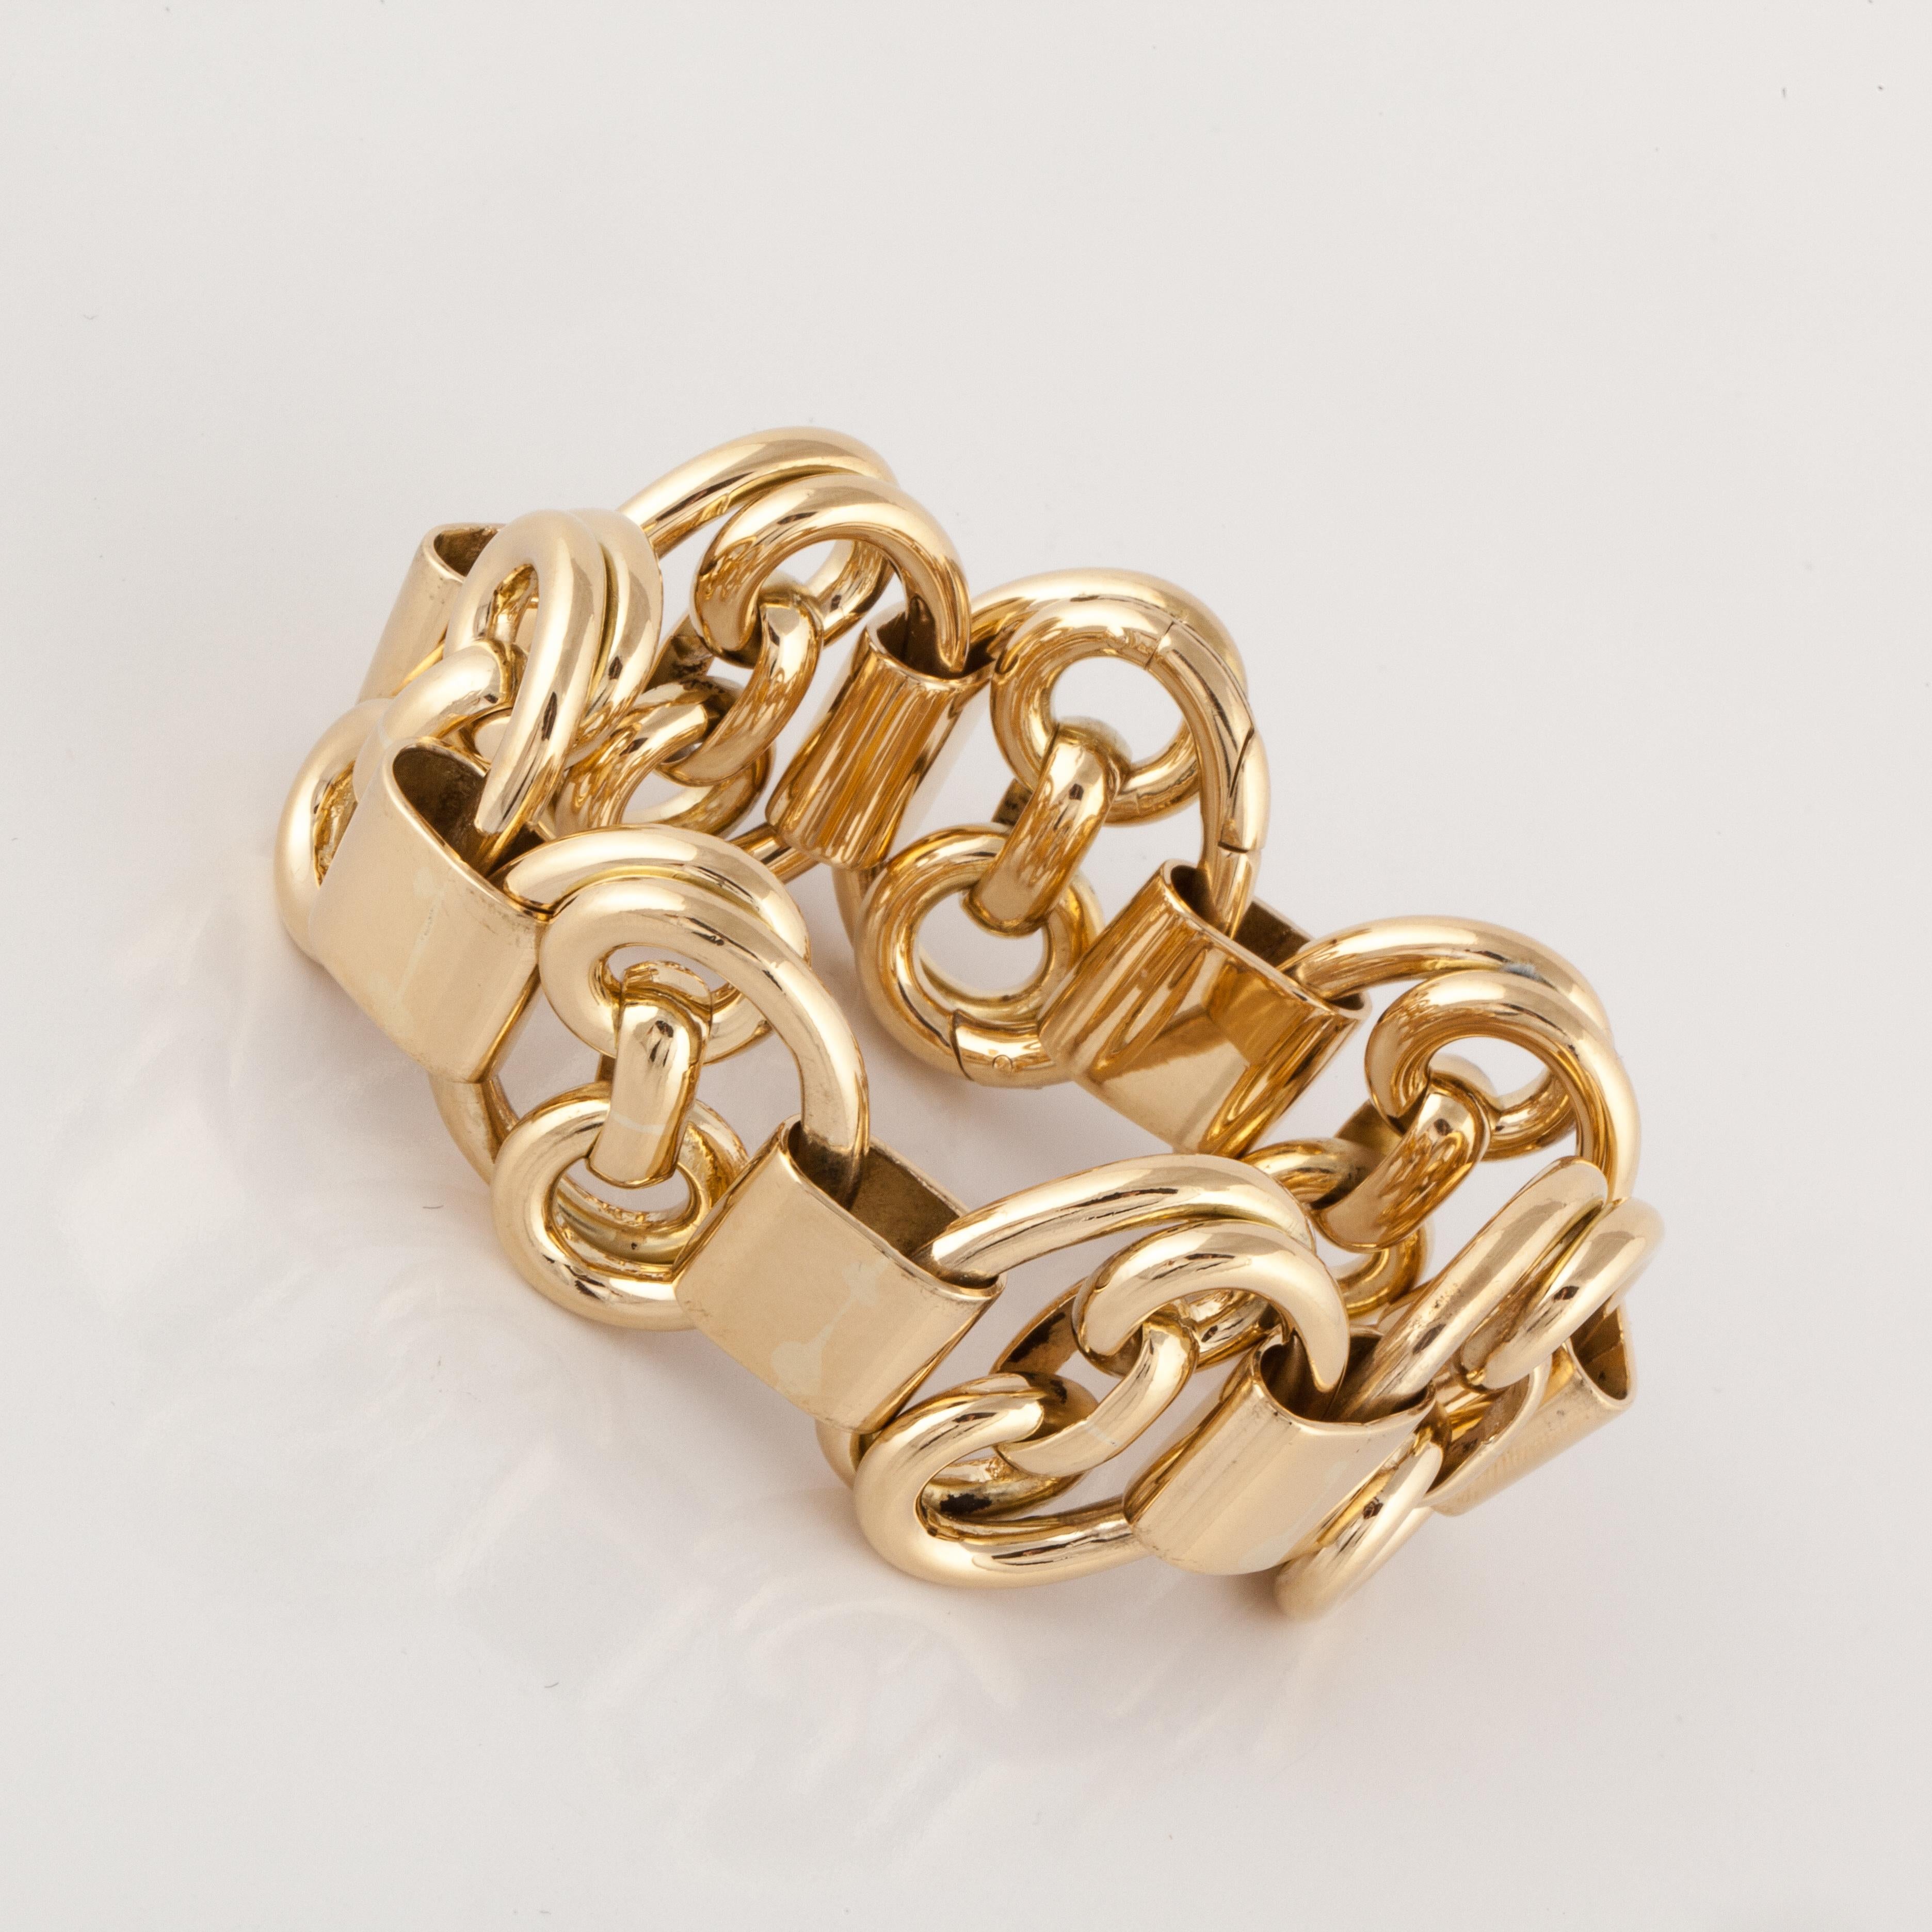 18K yellow gold heavy link bracelet.  The links are double swirls with flat spacers.  The catch is almost invisible in this high quality piece.  Measures 8 inches long and 1 3/16 inches wide.  